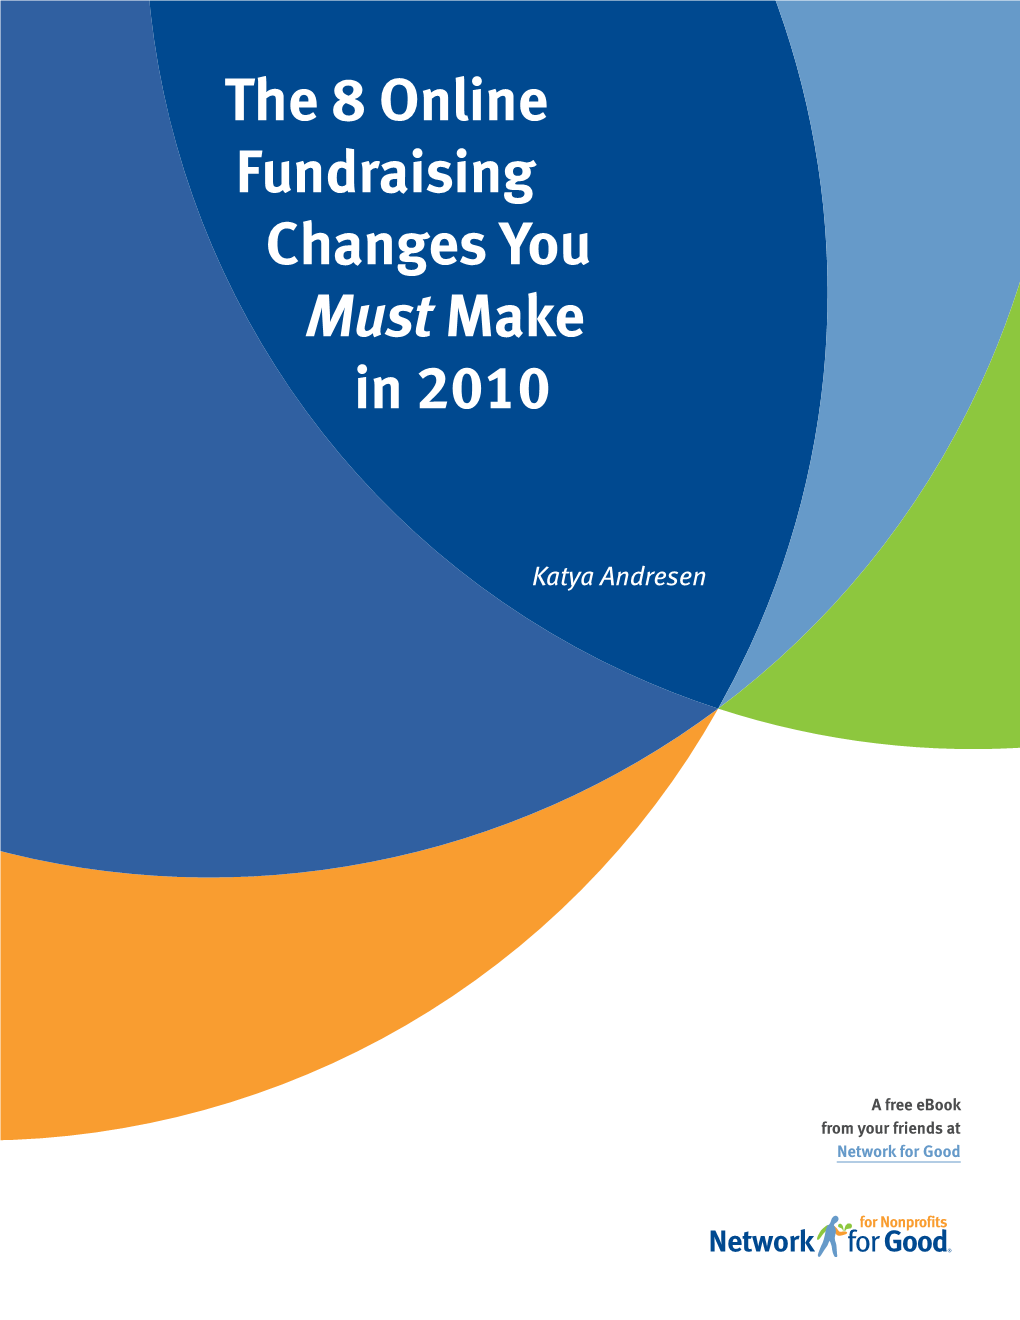 The 8 Online Fundraising Changes You Must Make in 2010